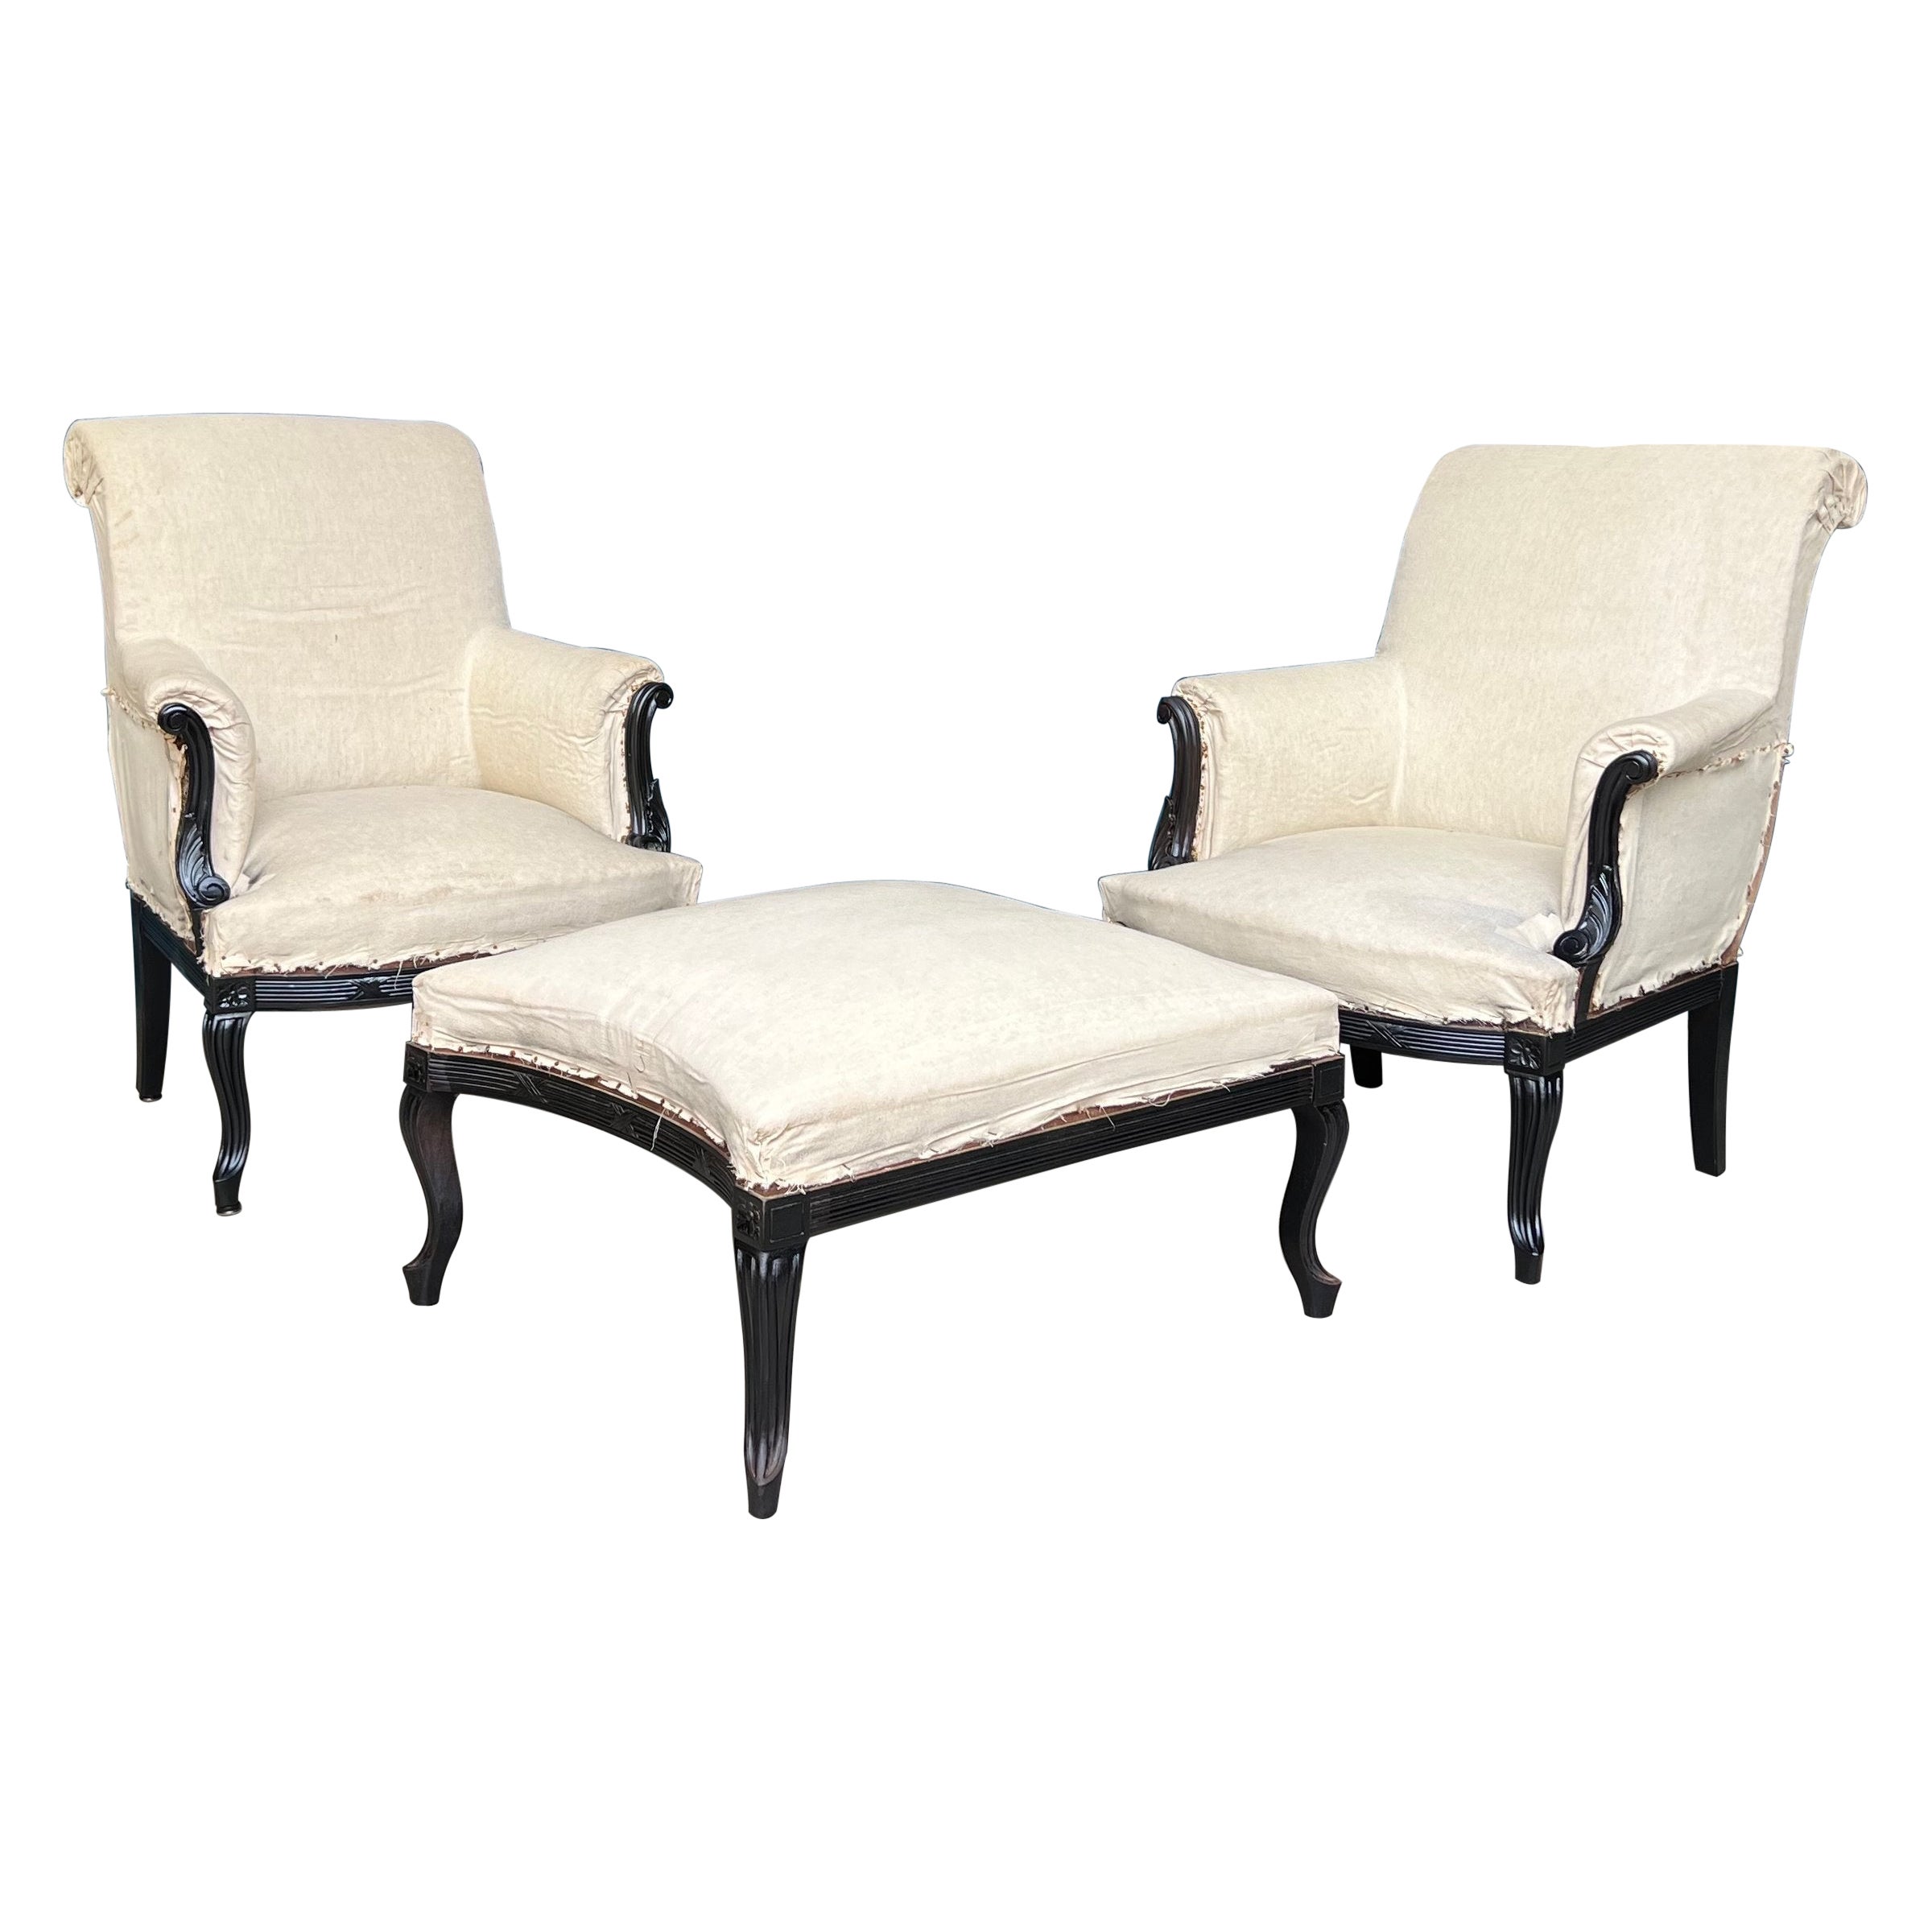 Pair of French Armchairs in Muslin with Matching Ottoman For Sale